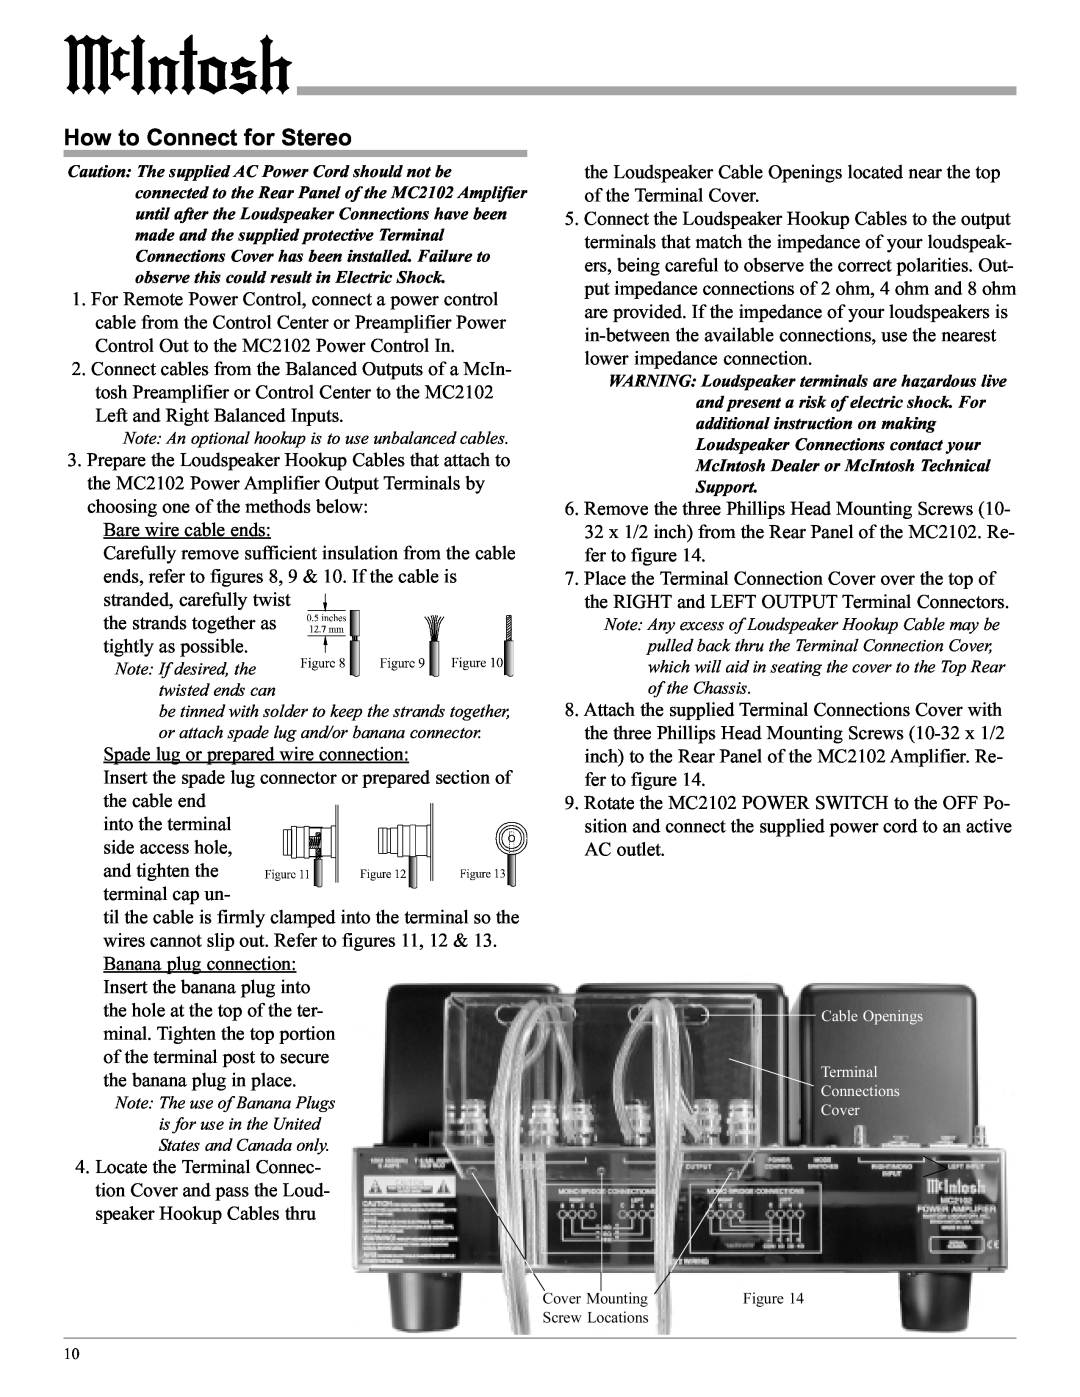 McIntosh MC2102 manual How to Connect for Stereo 